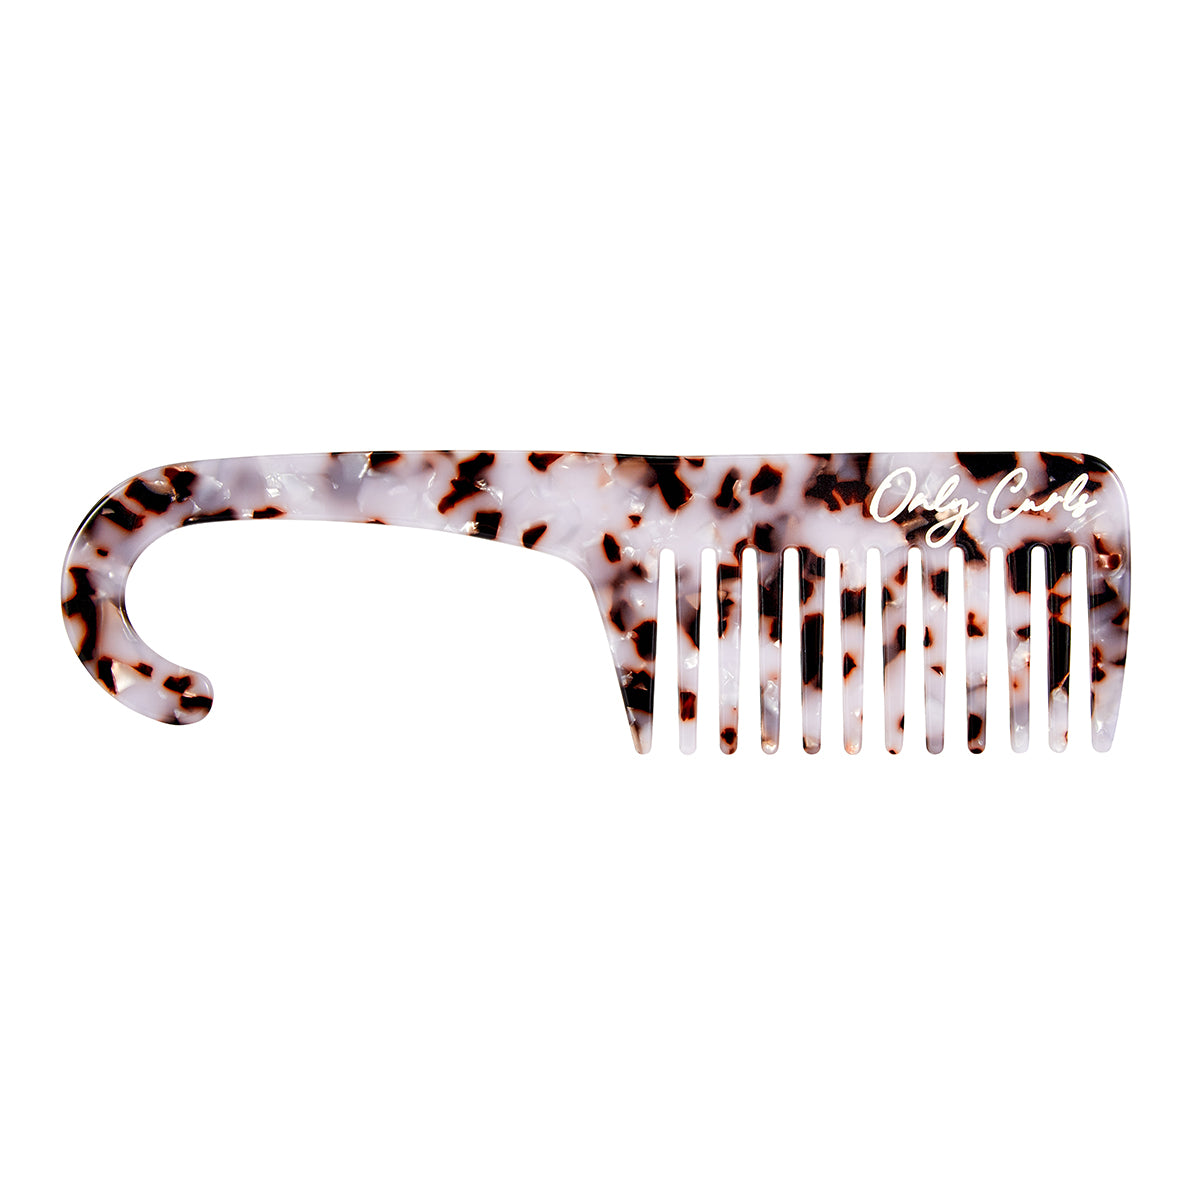 Only Curls Black Speckle Shower Comb - Only Curls